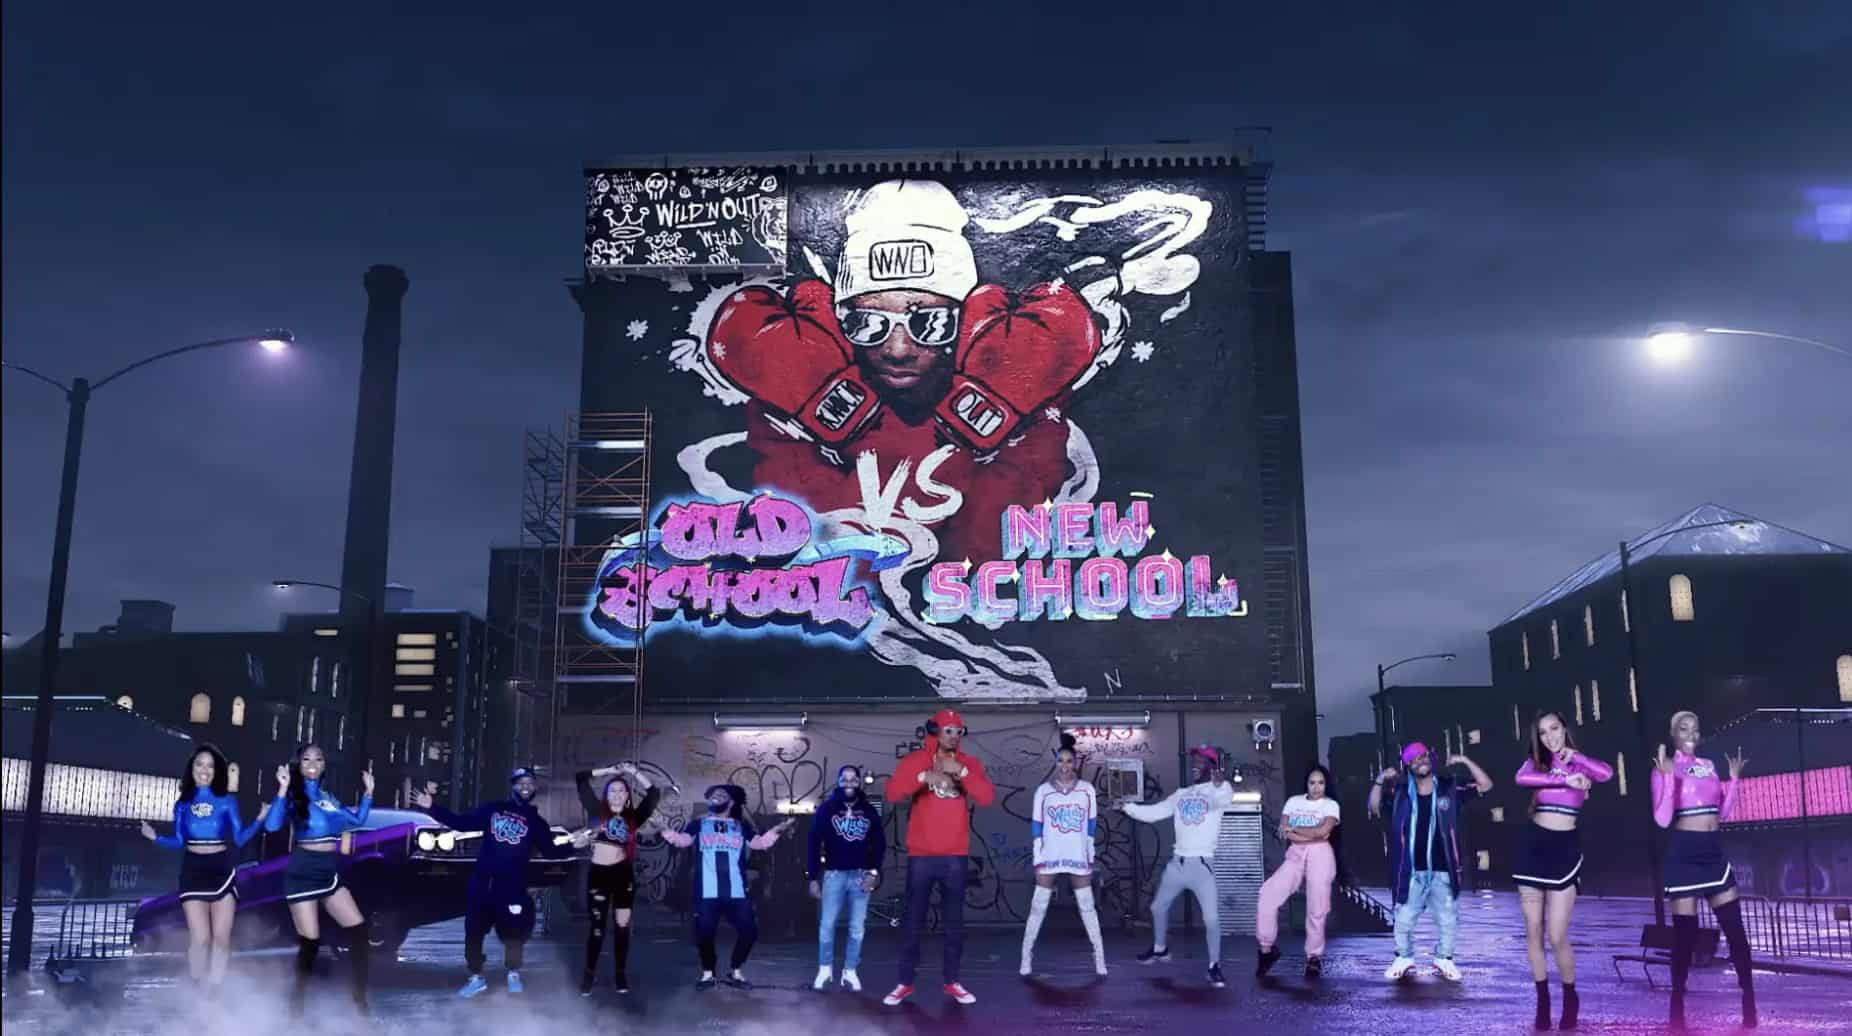 Wild 'N Out here image from opening sequence